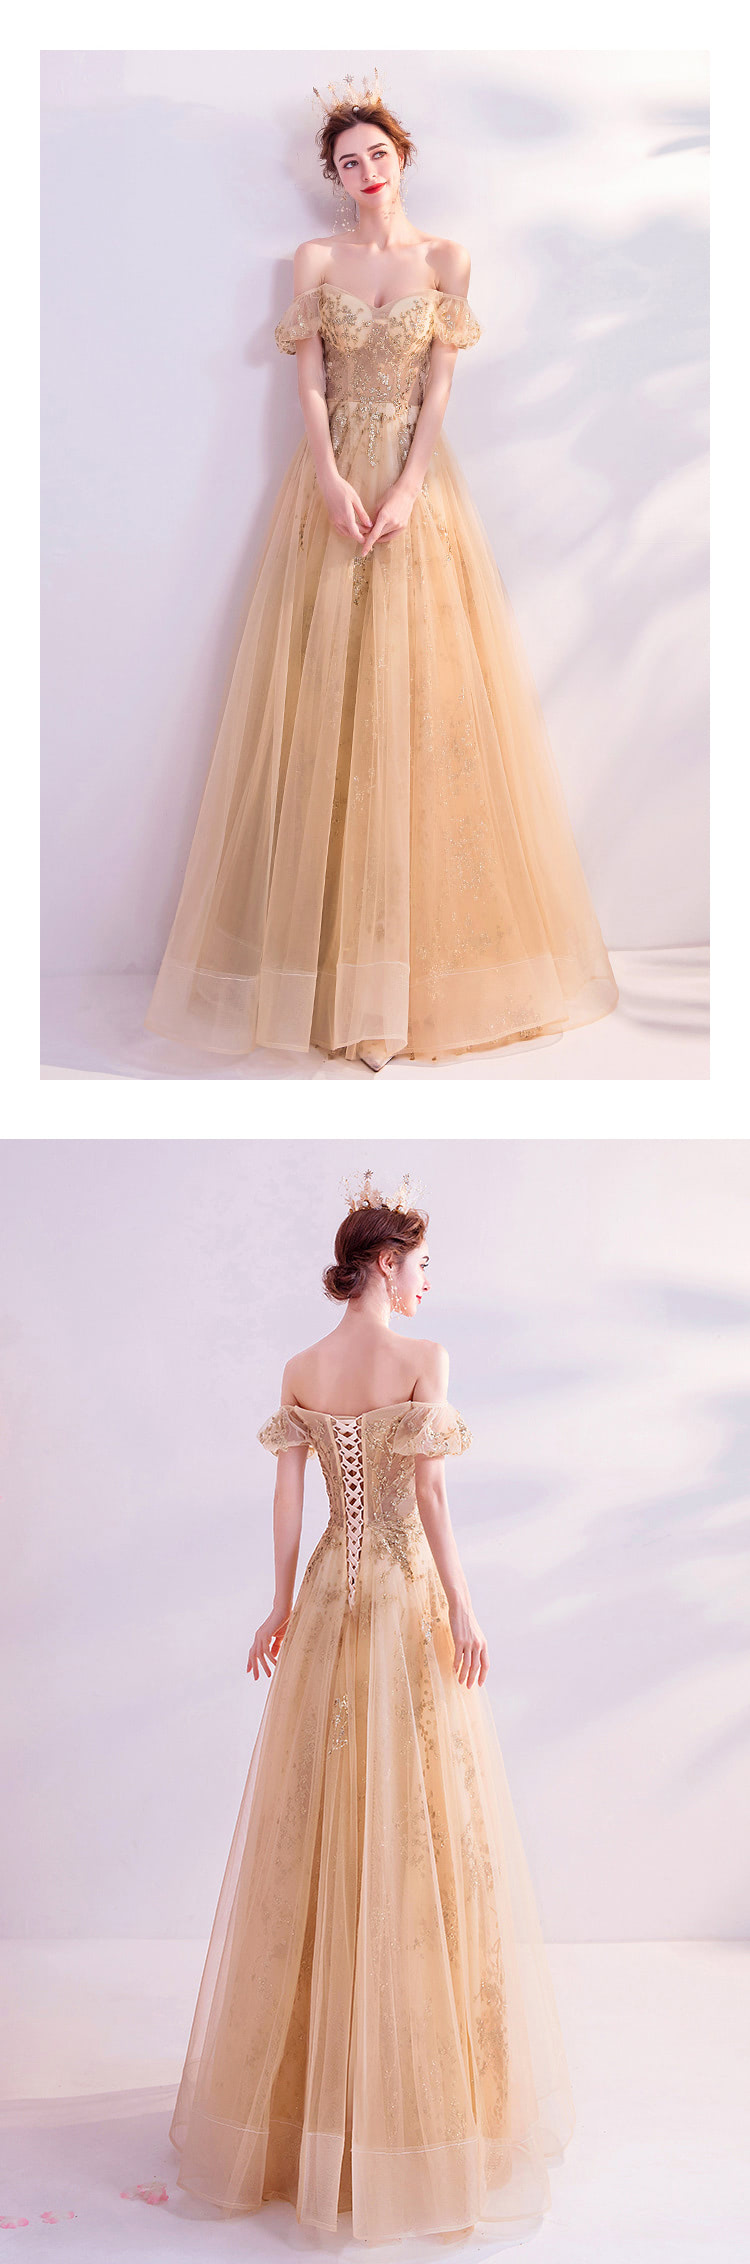 Off-Shoulder-Golden-Evening-Gown-Prom-Dress-for-Toast-Banquet-Party11